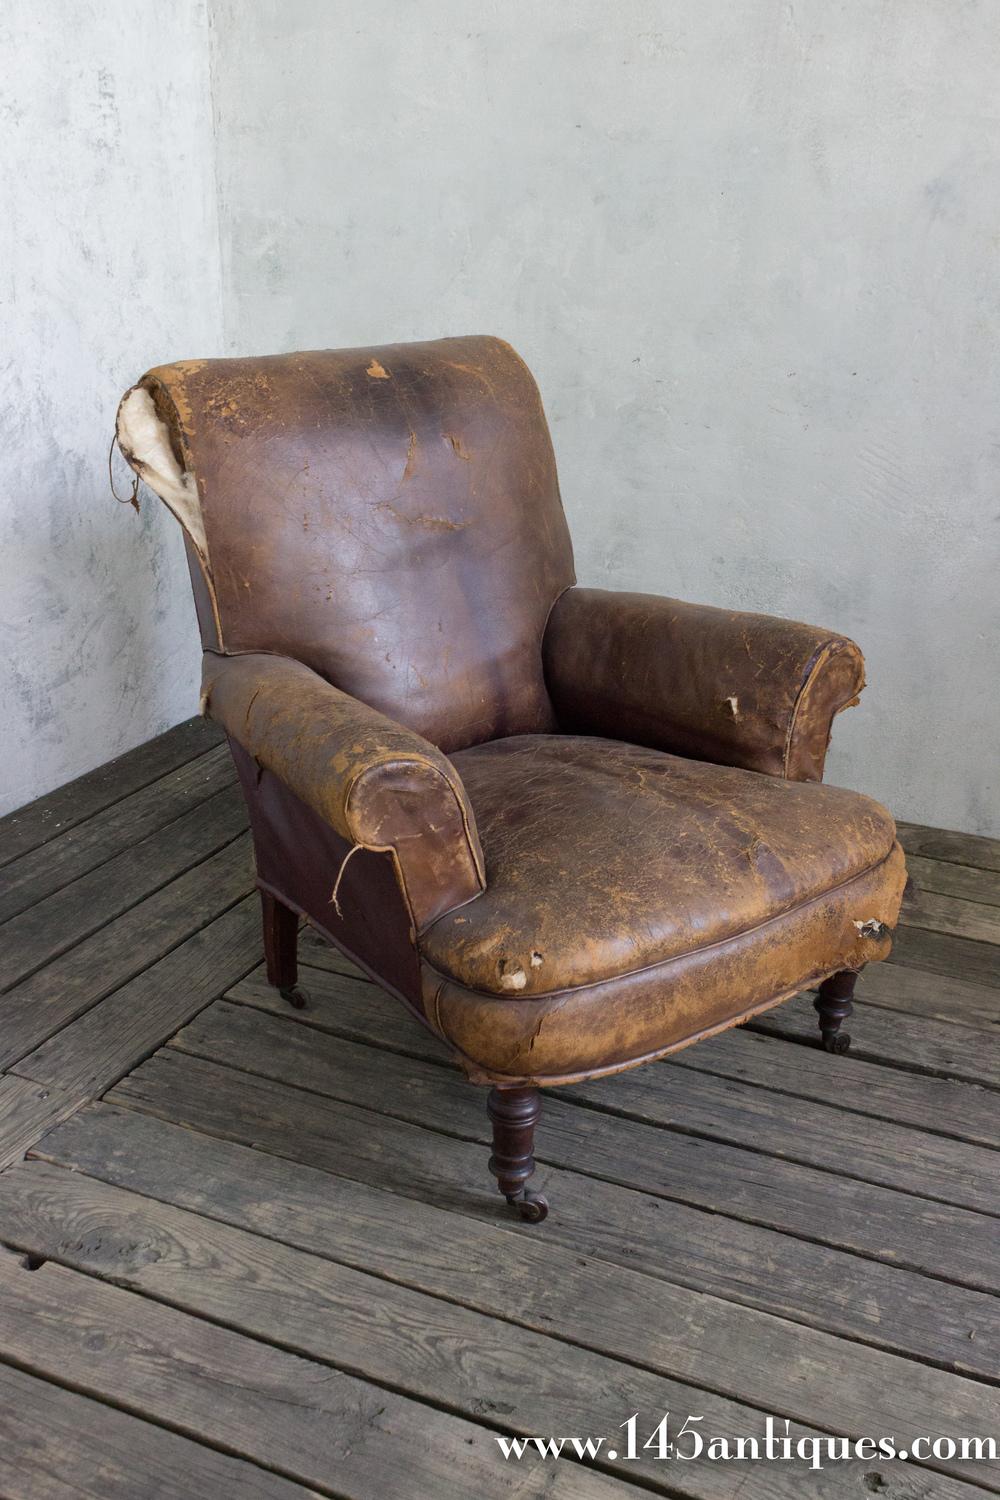 A large French Napoleon III armchair in brown leather. Add luxurious style and comfort to your home with this classic French 19th century Napoleon III leather armchair. Boasting a distinctive silhouette and brown distressed leather upholstery, it is